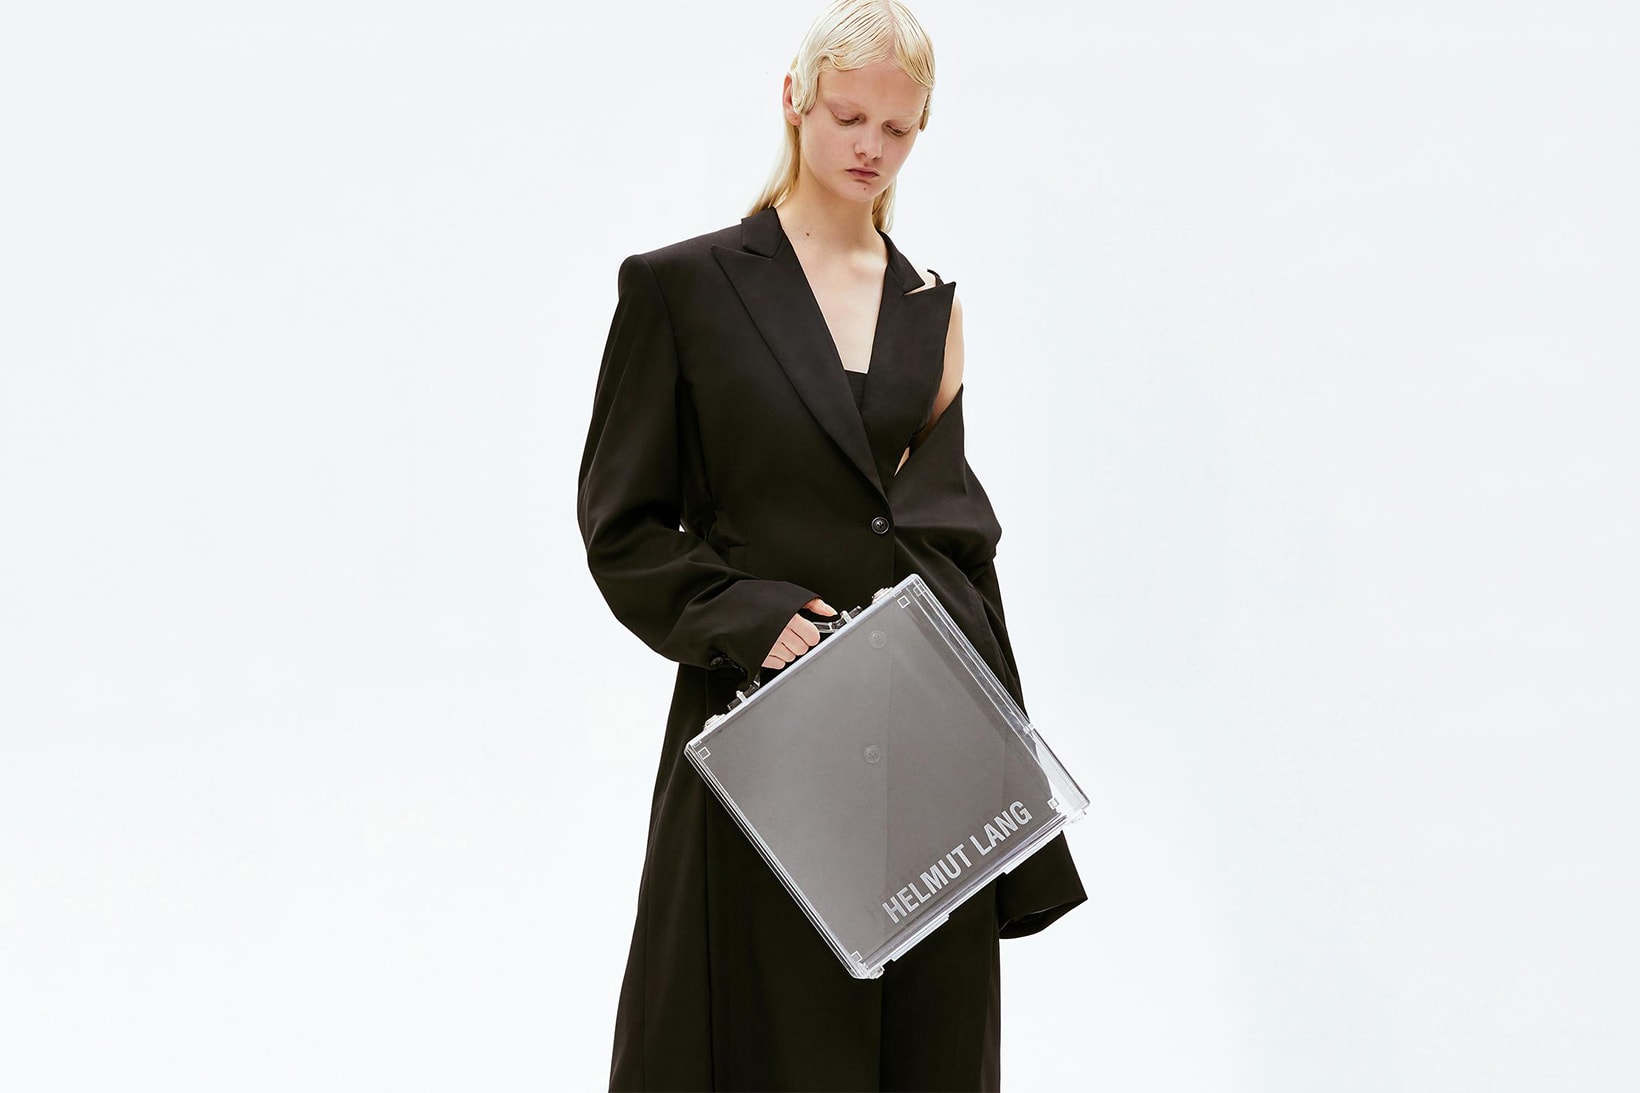 Helmut Lang Releases Lucite Briefcase transparent translucent clear see through